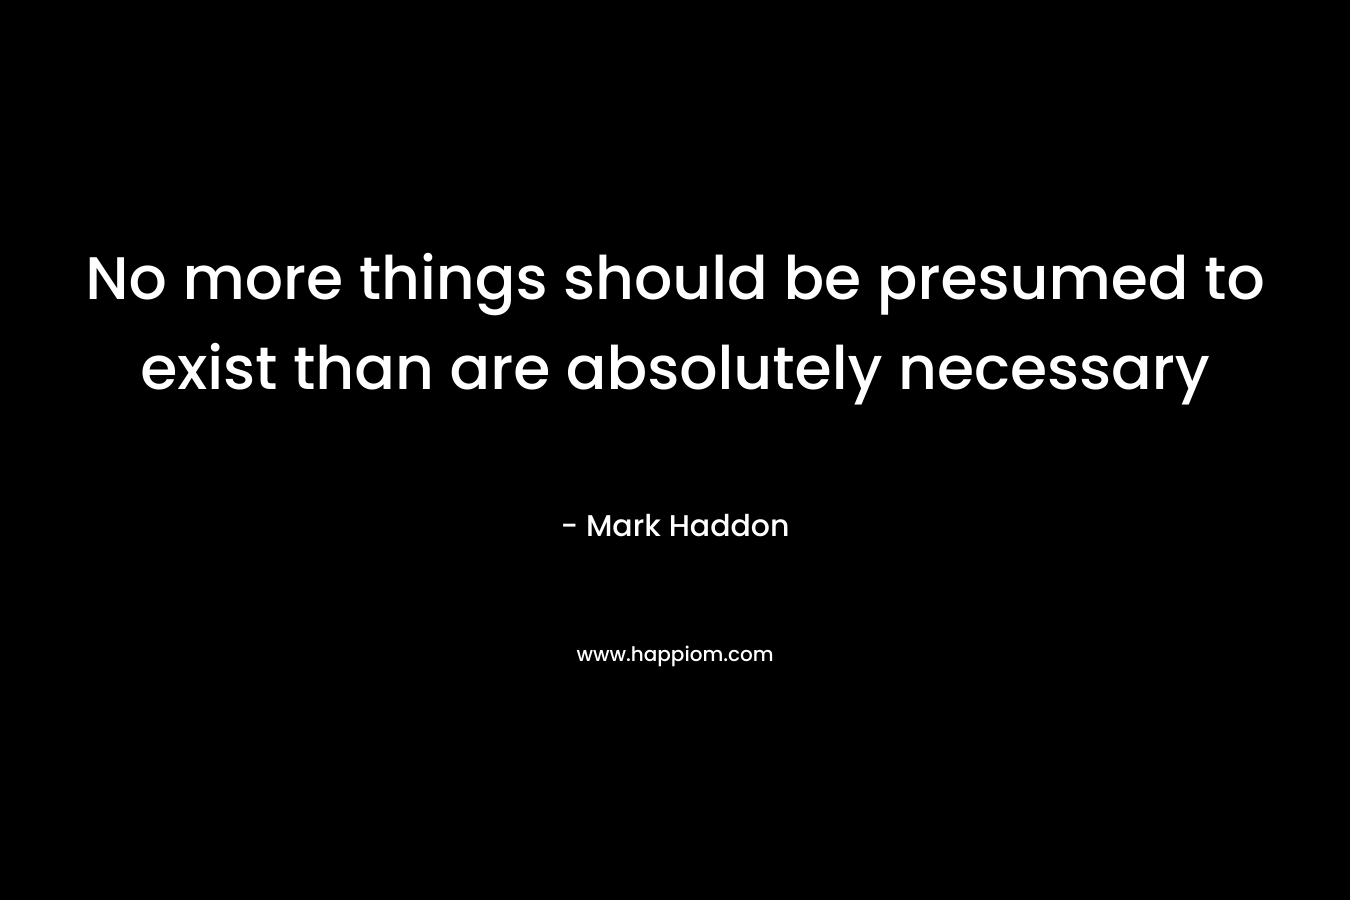 No more things should be presumed to exist than are absolutely necessary